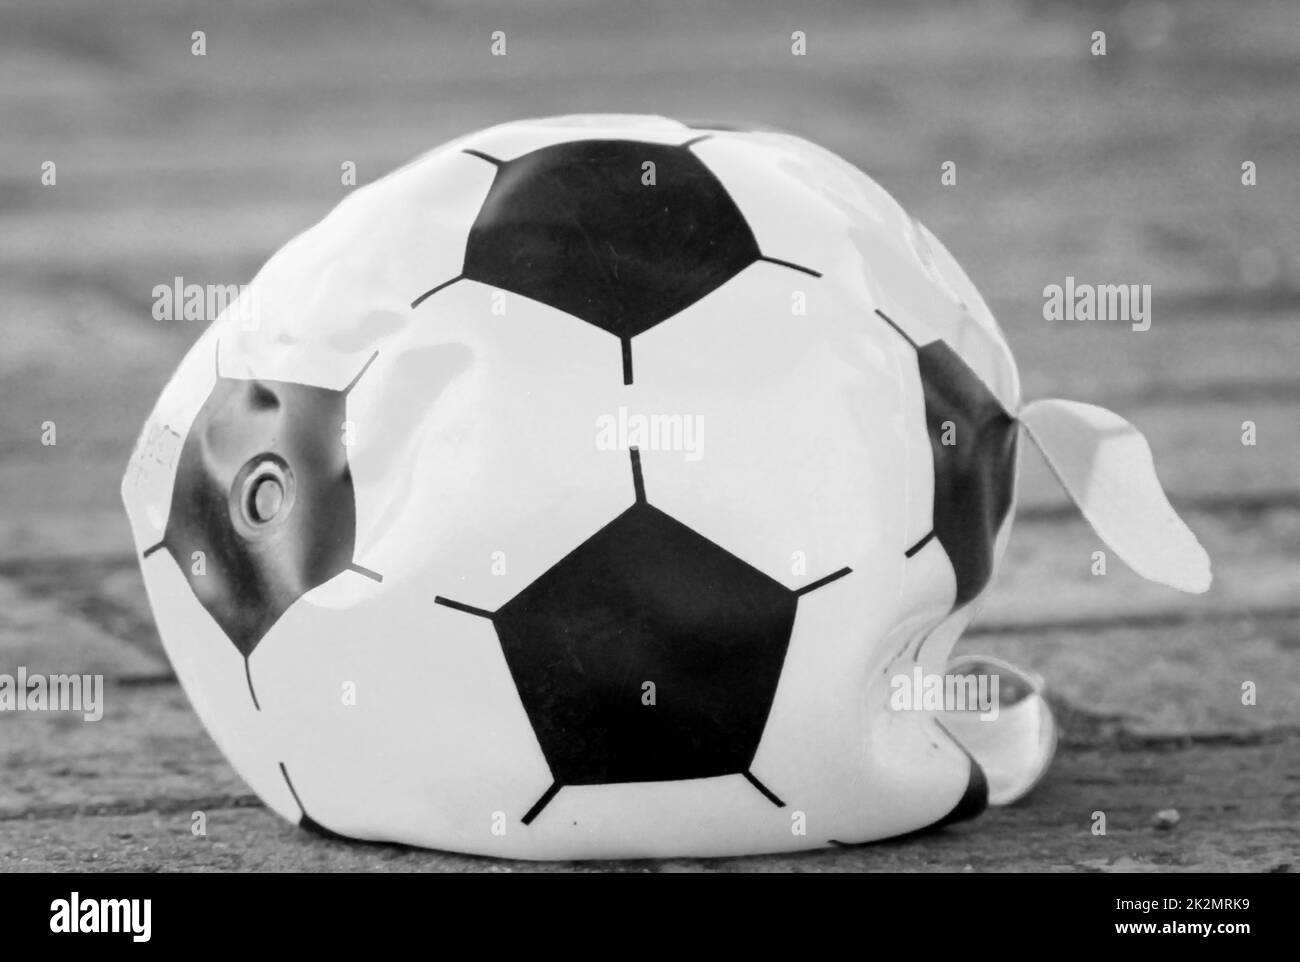 The air is out of a soccer. Stock Photo